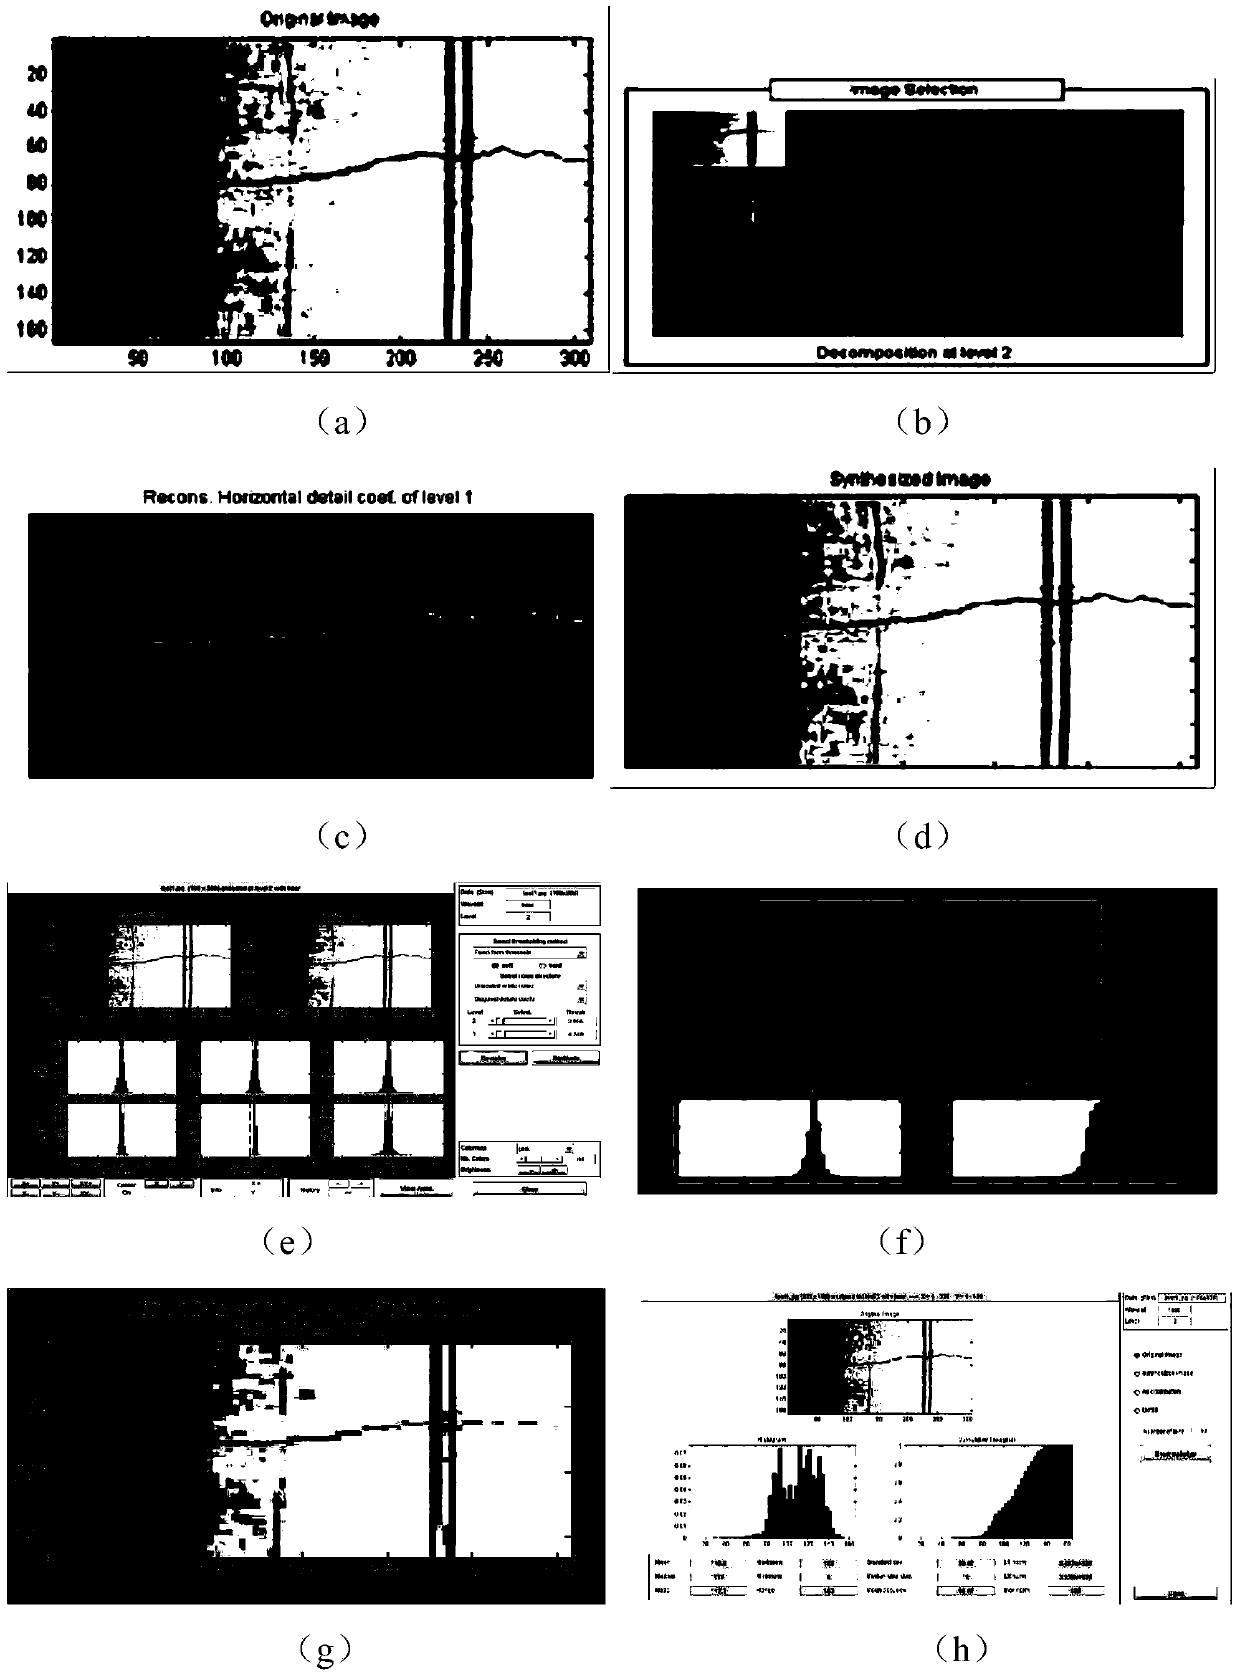 Machine vision-based building structure crack detection and repair method